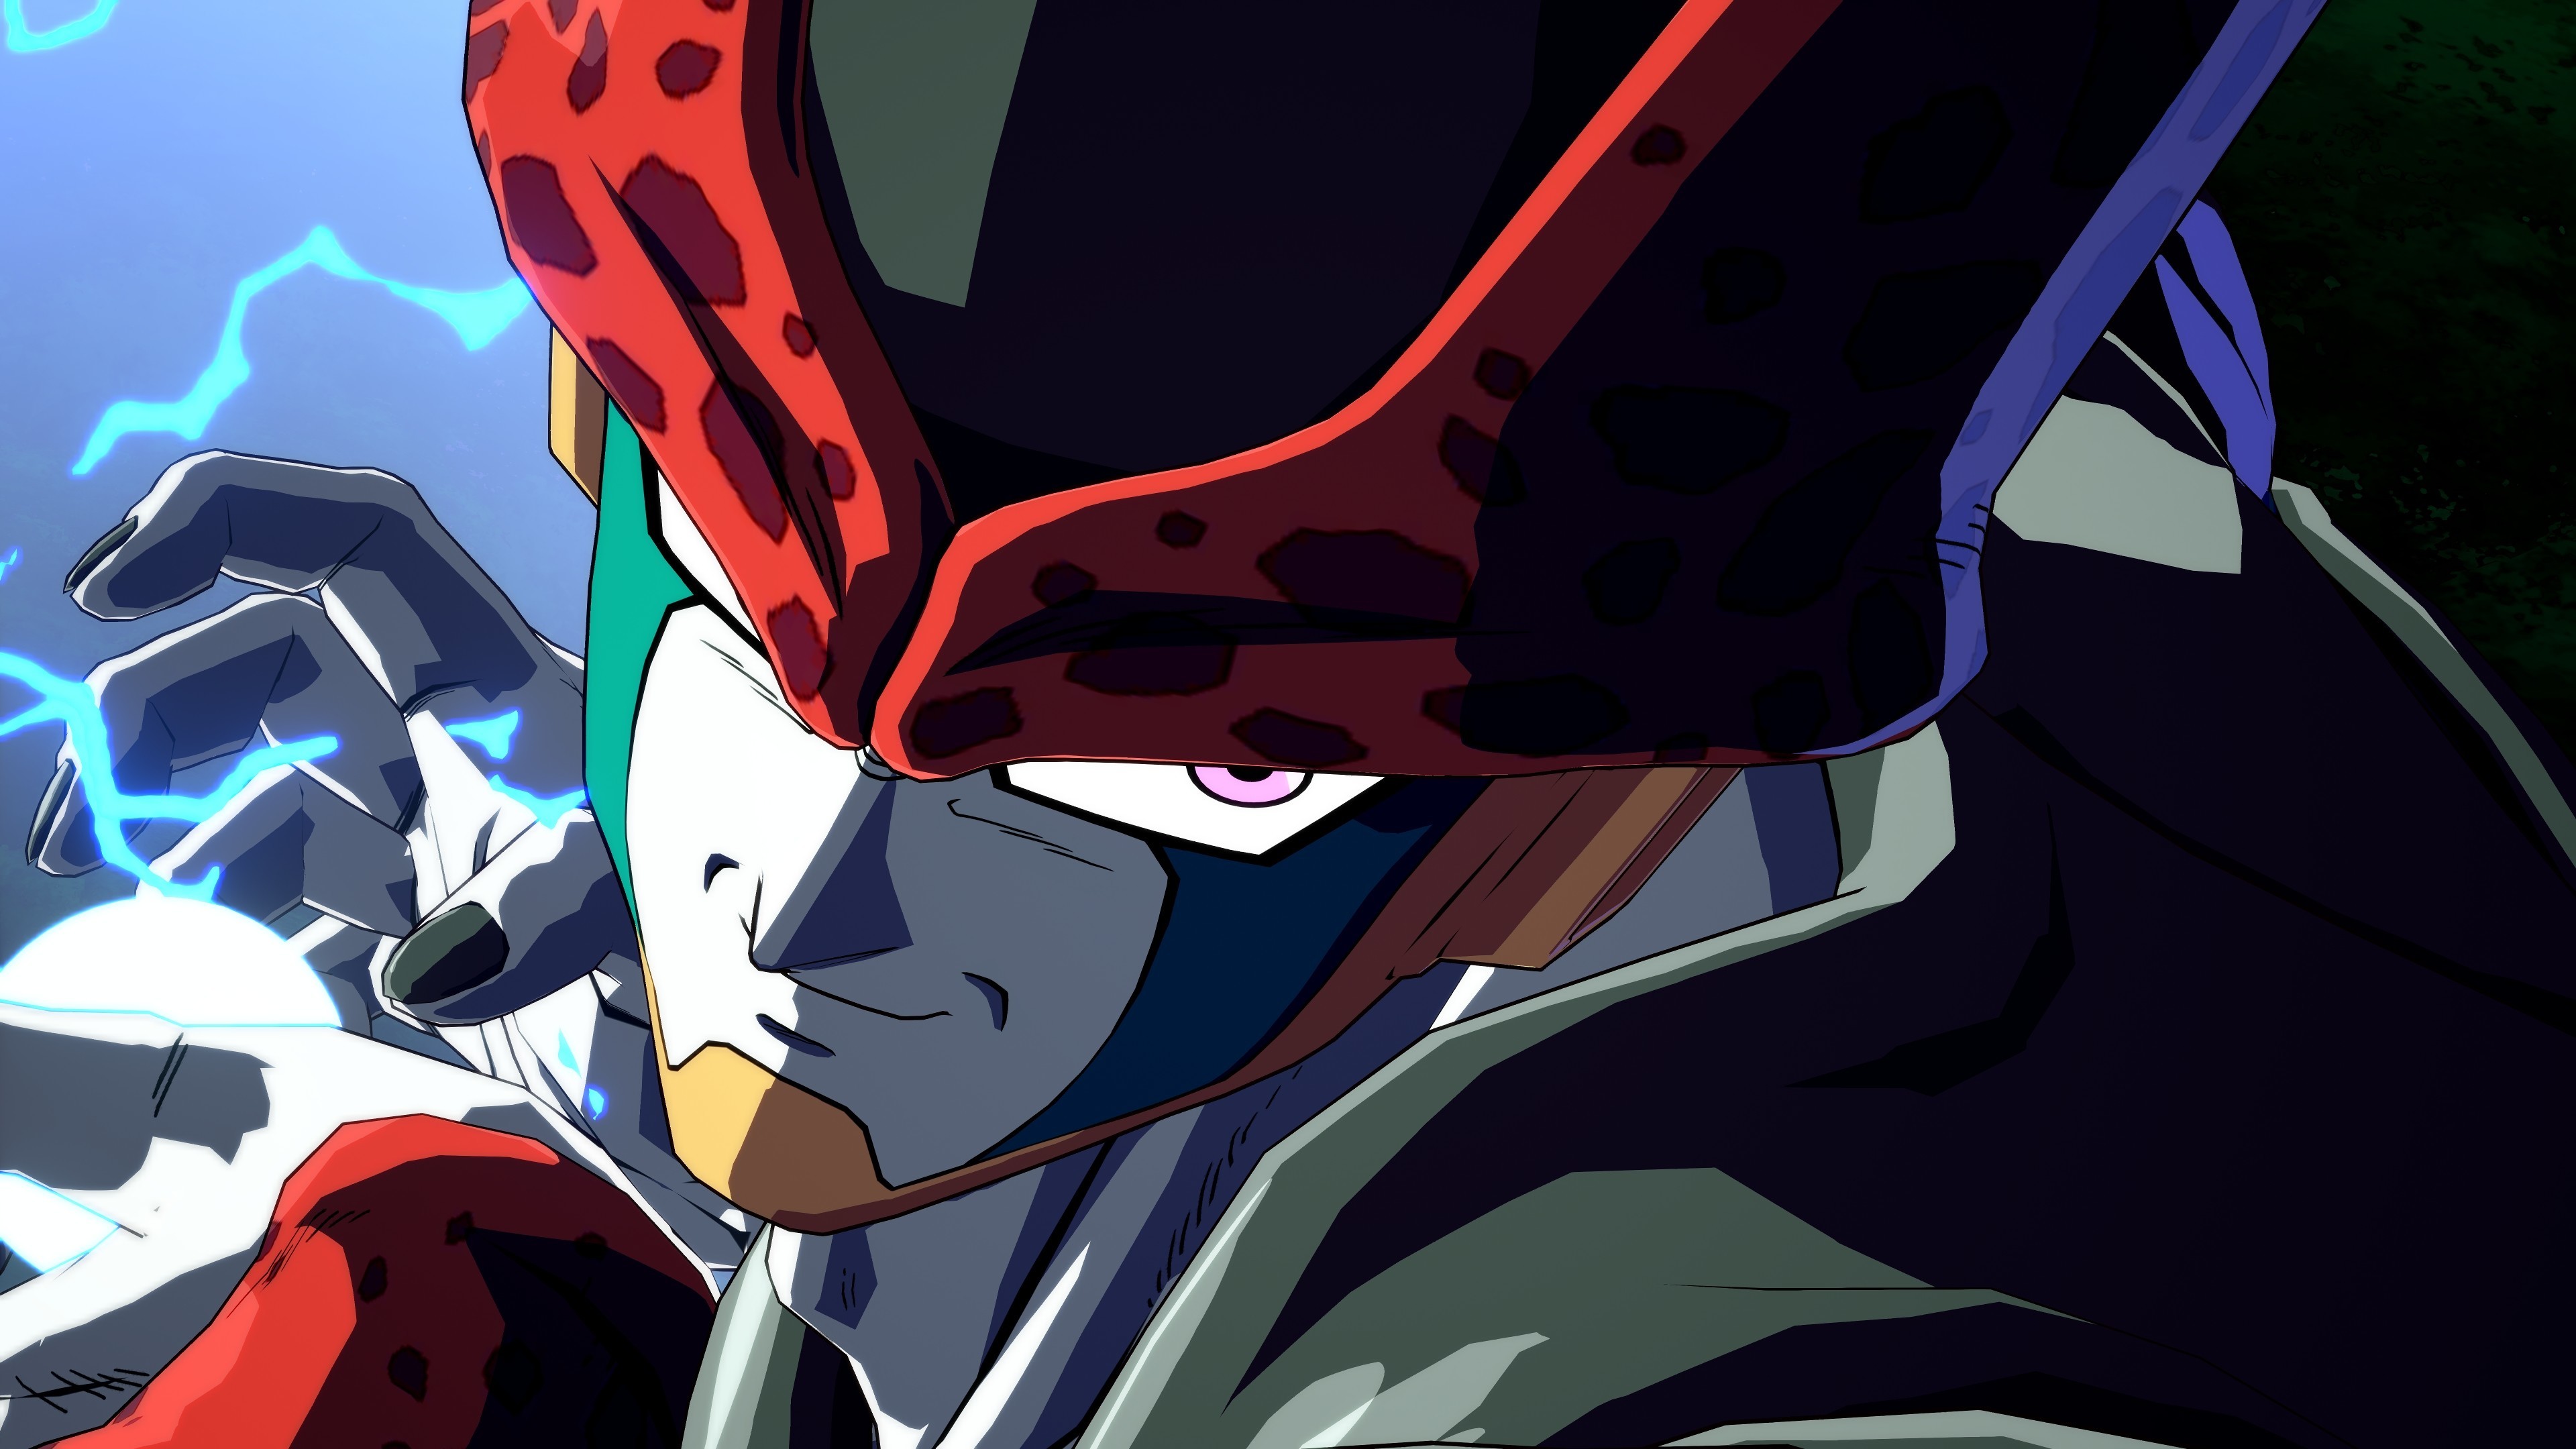 Cell Dbz Wallpapers 64 Pictures